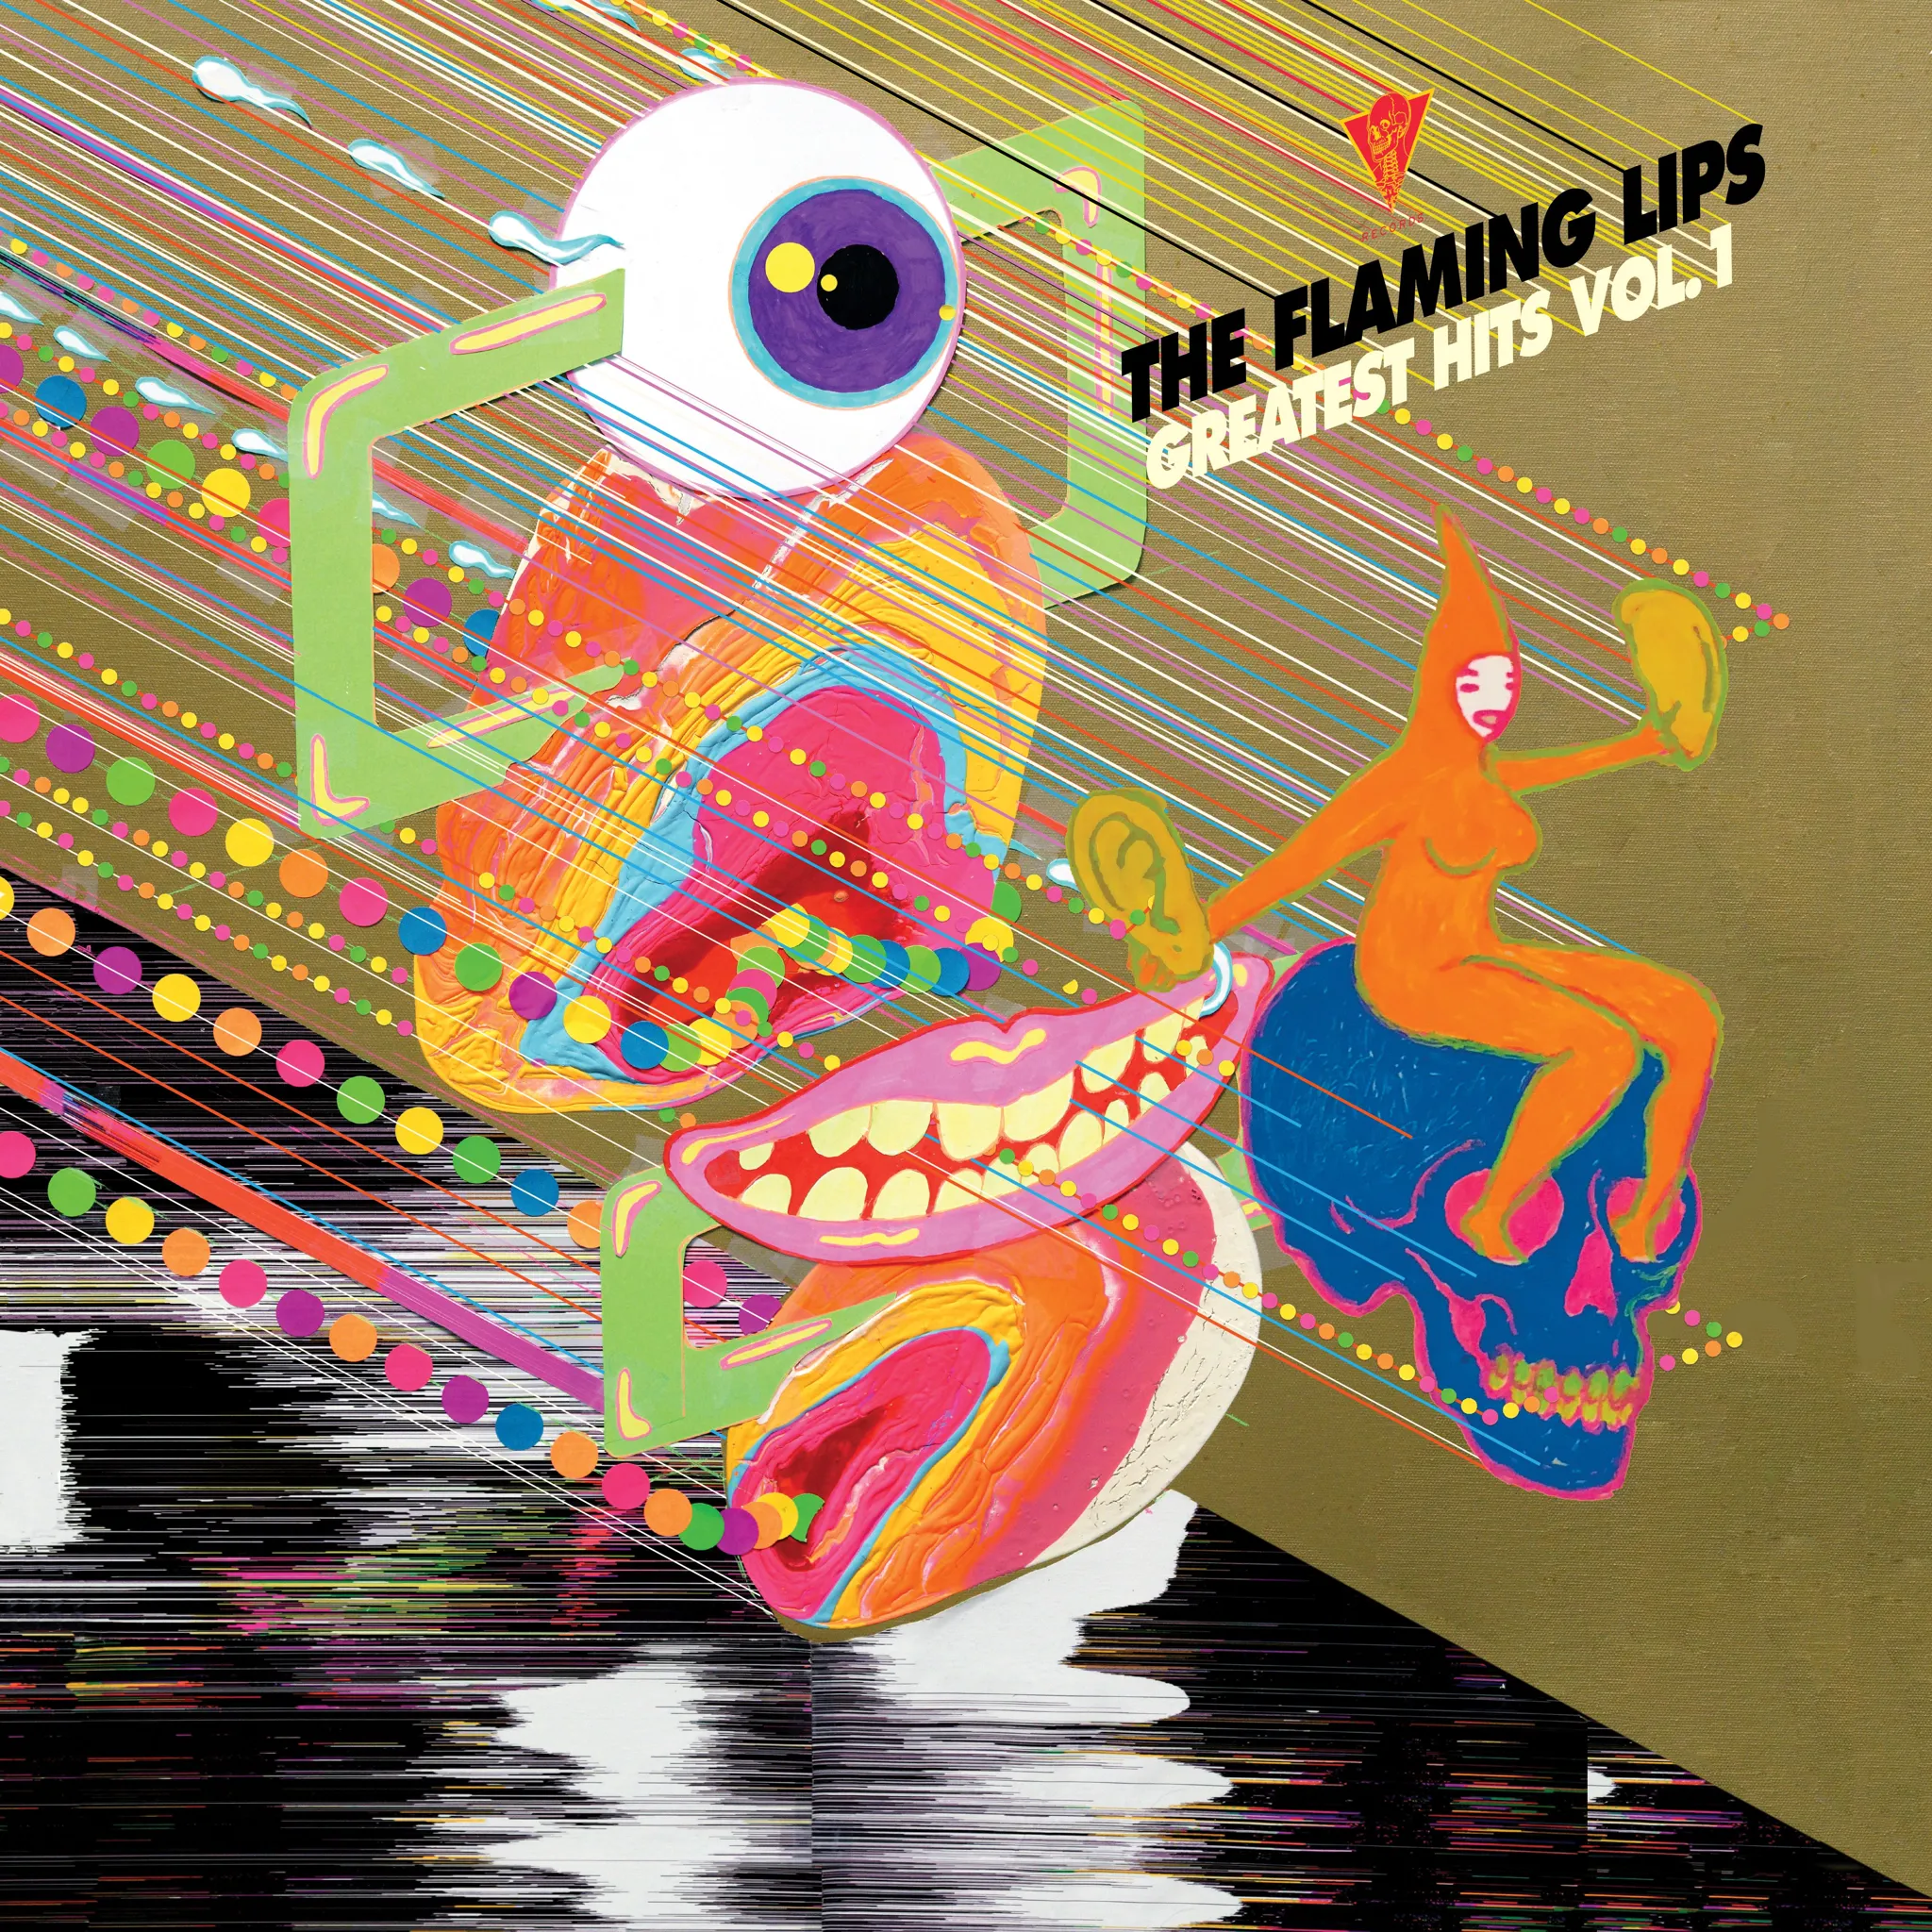 <strong>The Flaming Lips - Greatest Hits Vol 1 (Deluxe Edition)</strong> (Vinyl LP - gold)